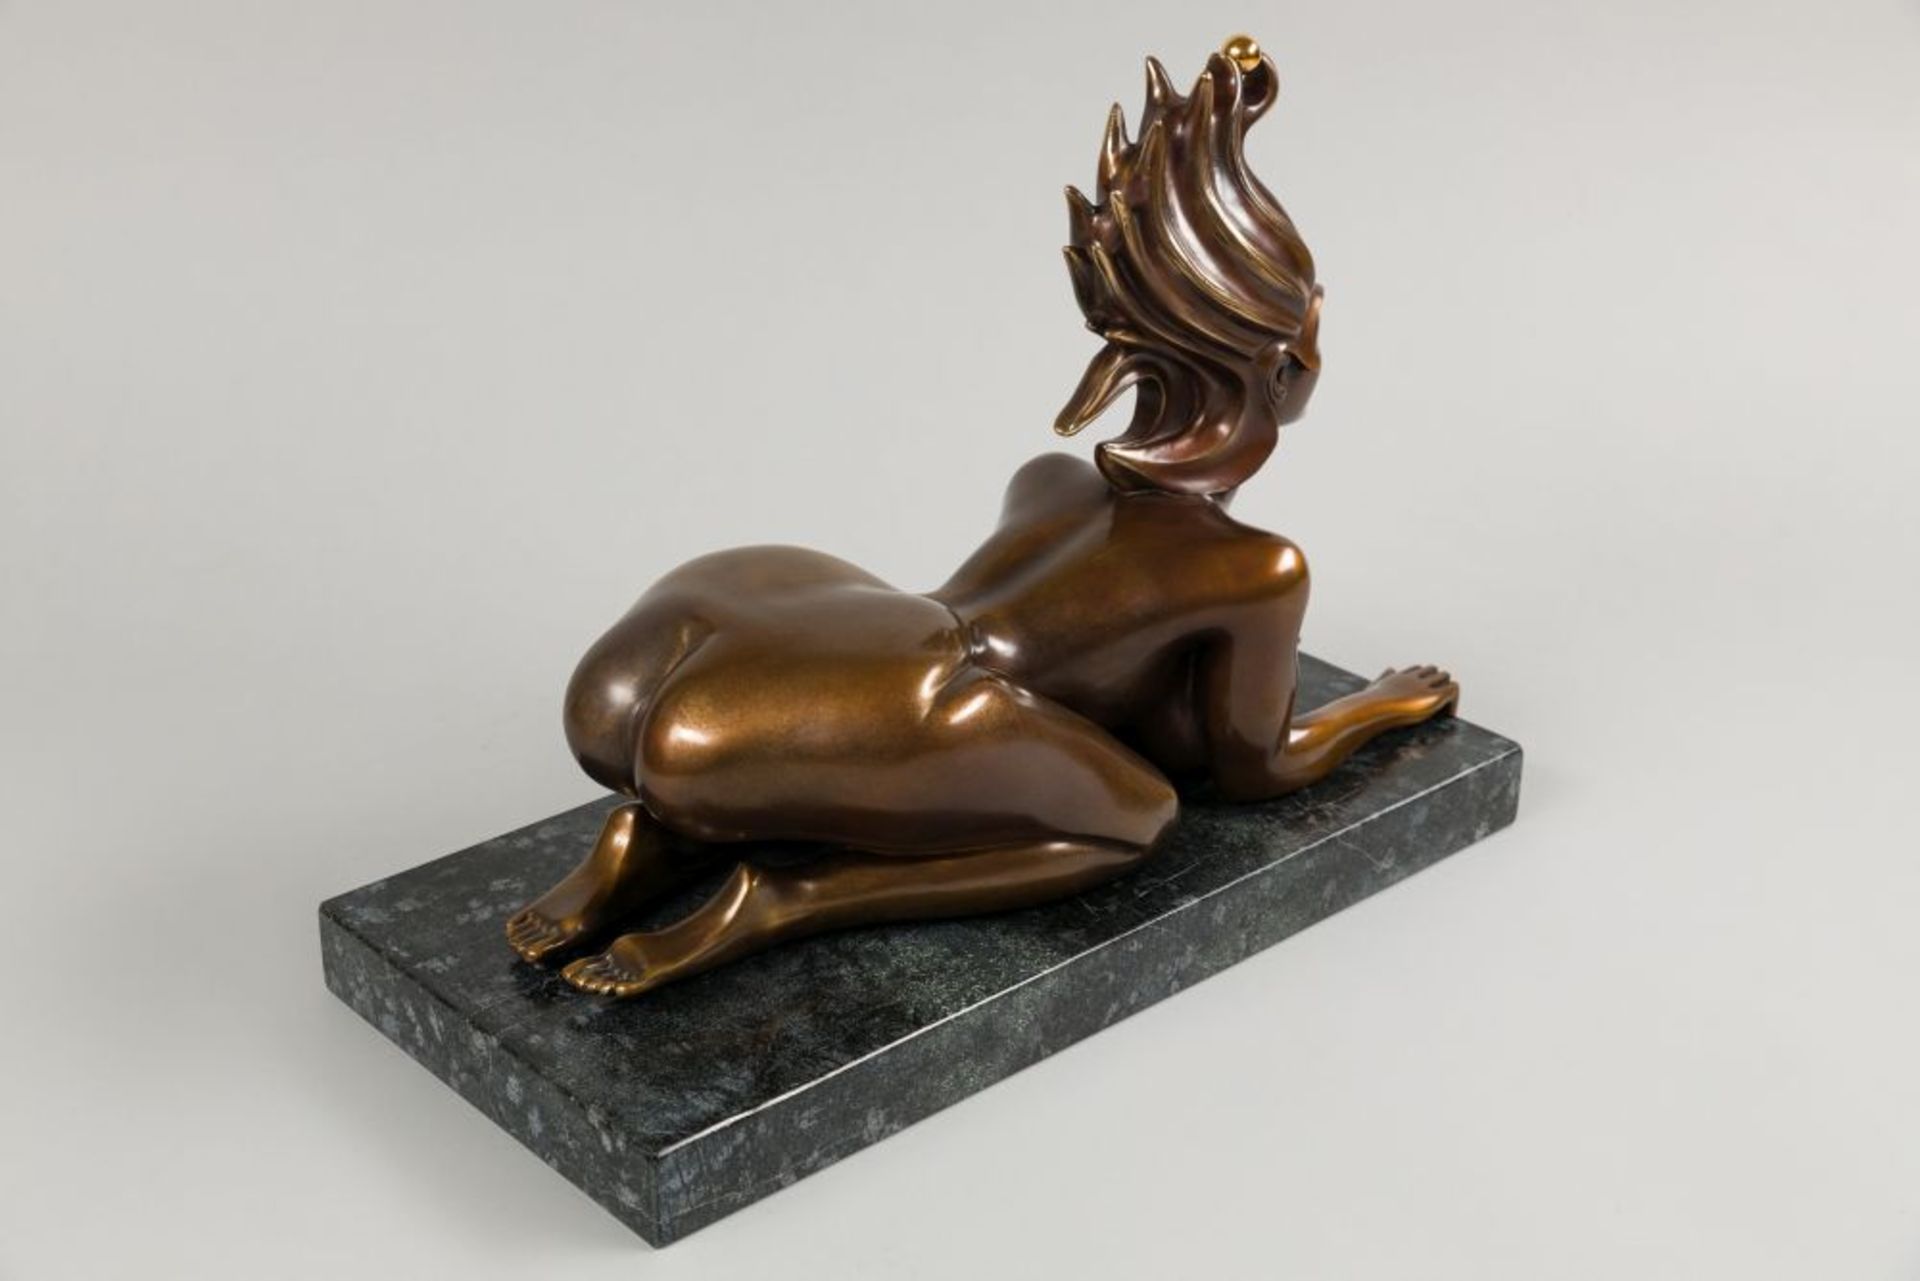 Viennese Sphinx Bronze on granite-pedestal Signed and numbered: 32/500 12,6 x 7,9 in - Image 6 of 11